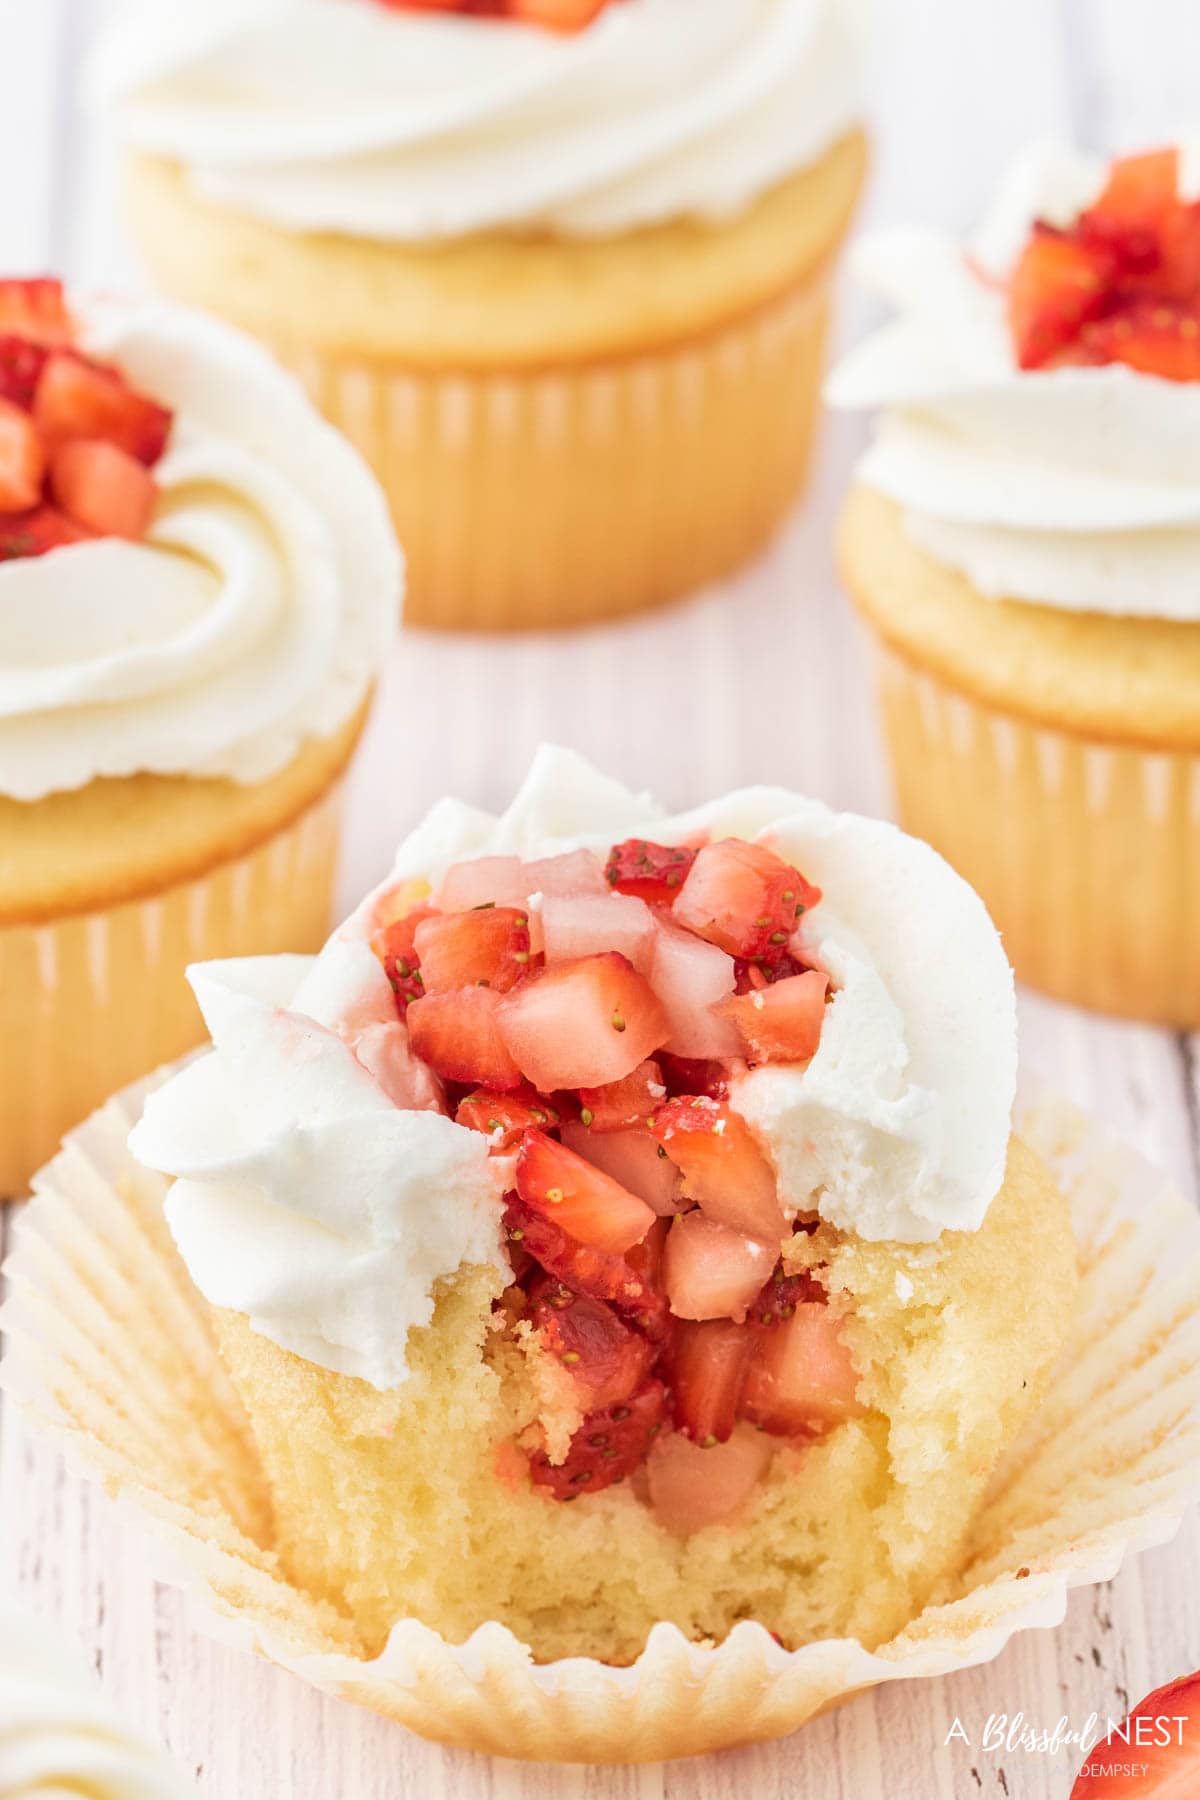 A cupcake cut open to show the strawberry filling inside.